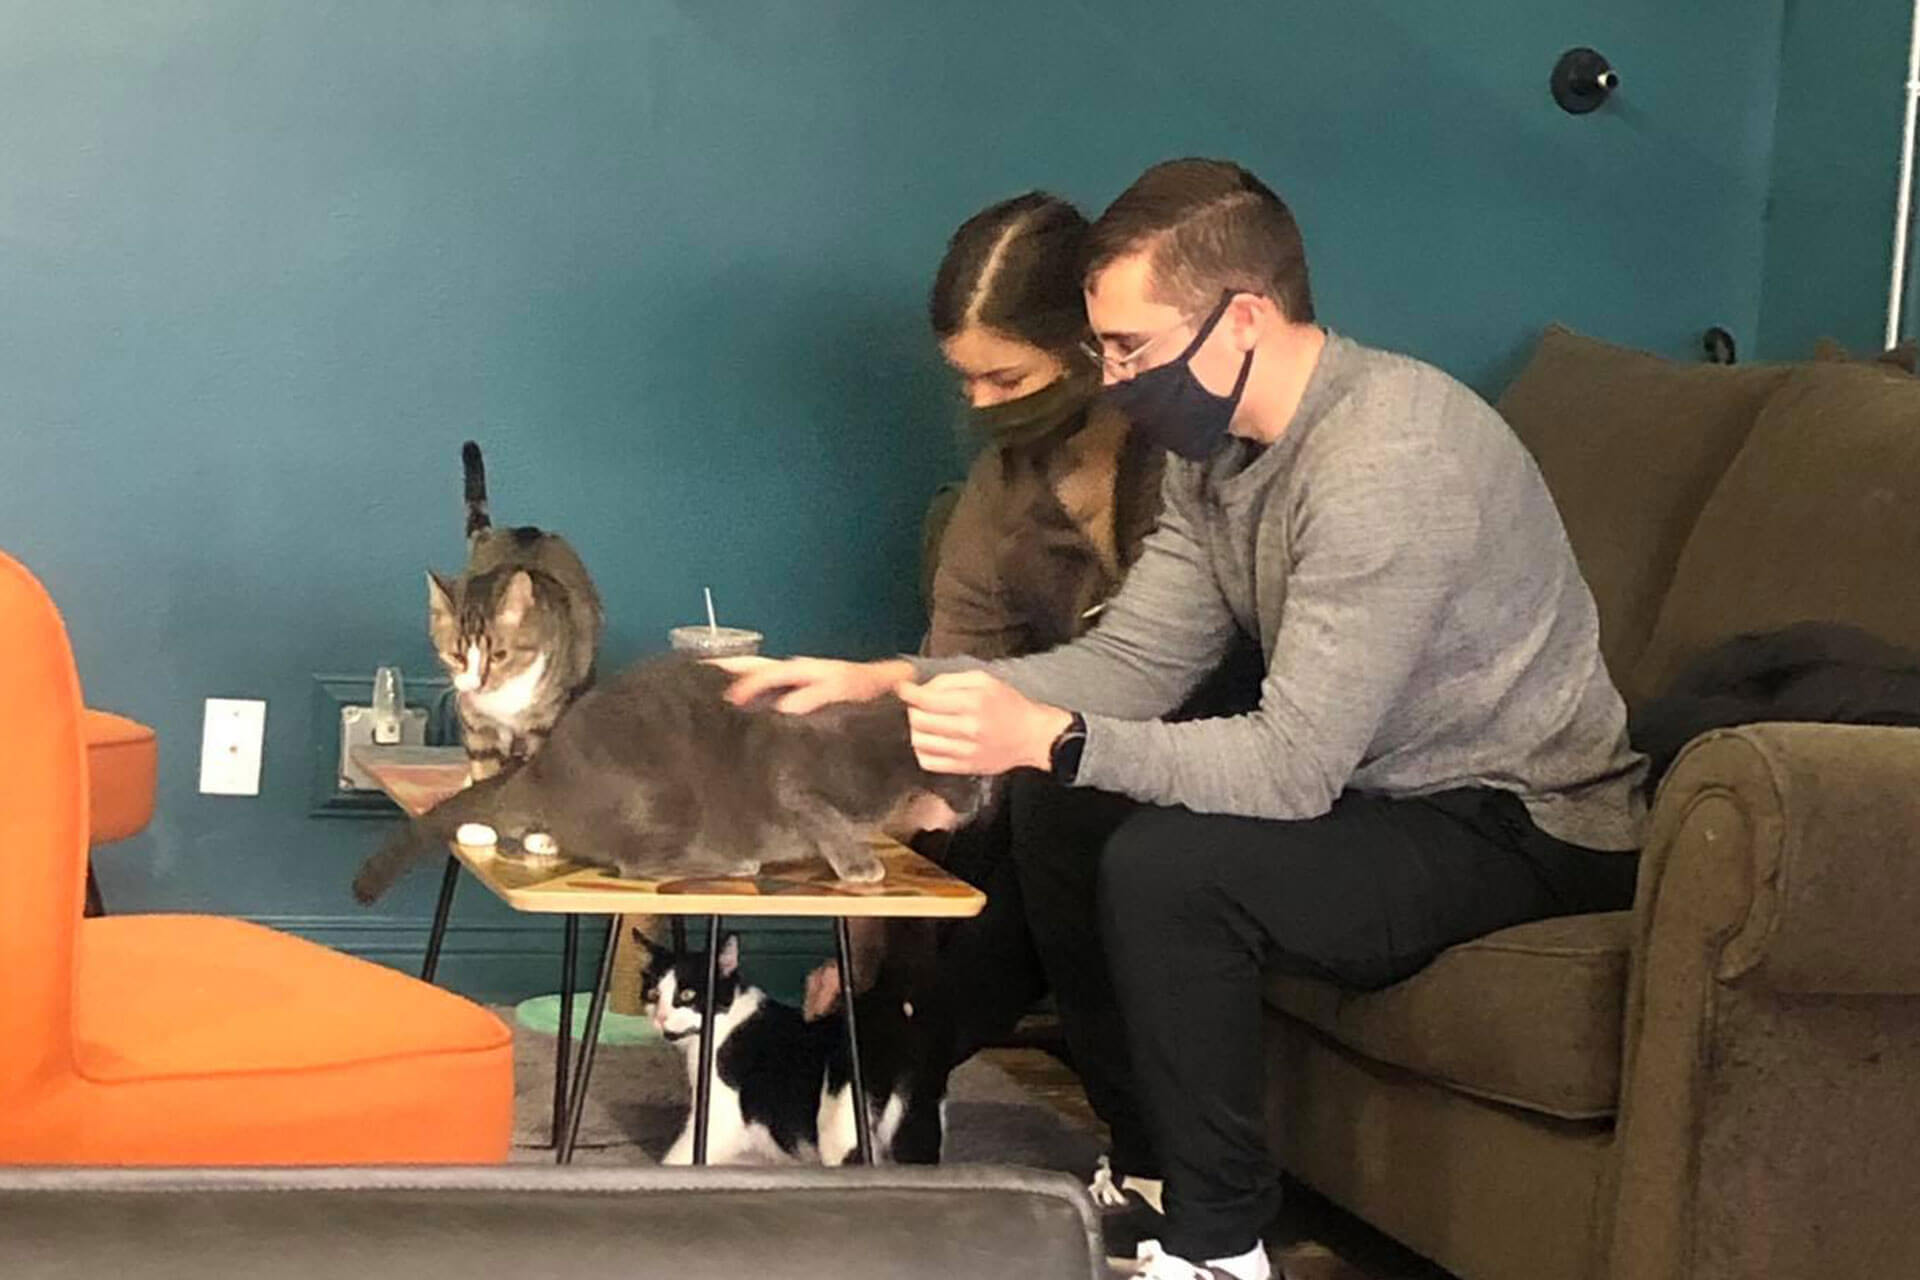 Customers enjoying a snack and some cats.